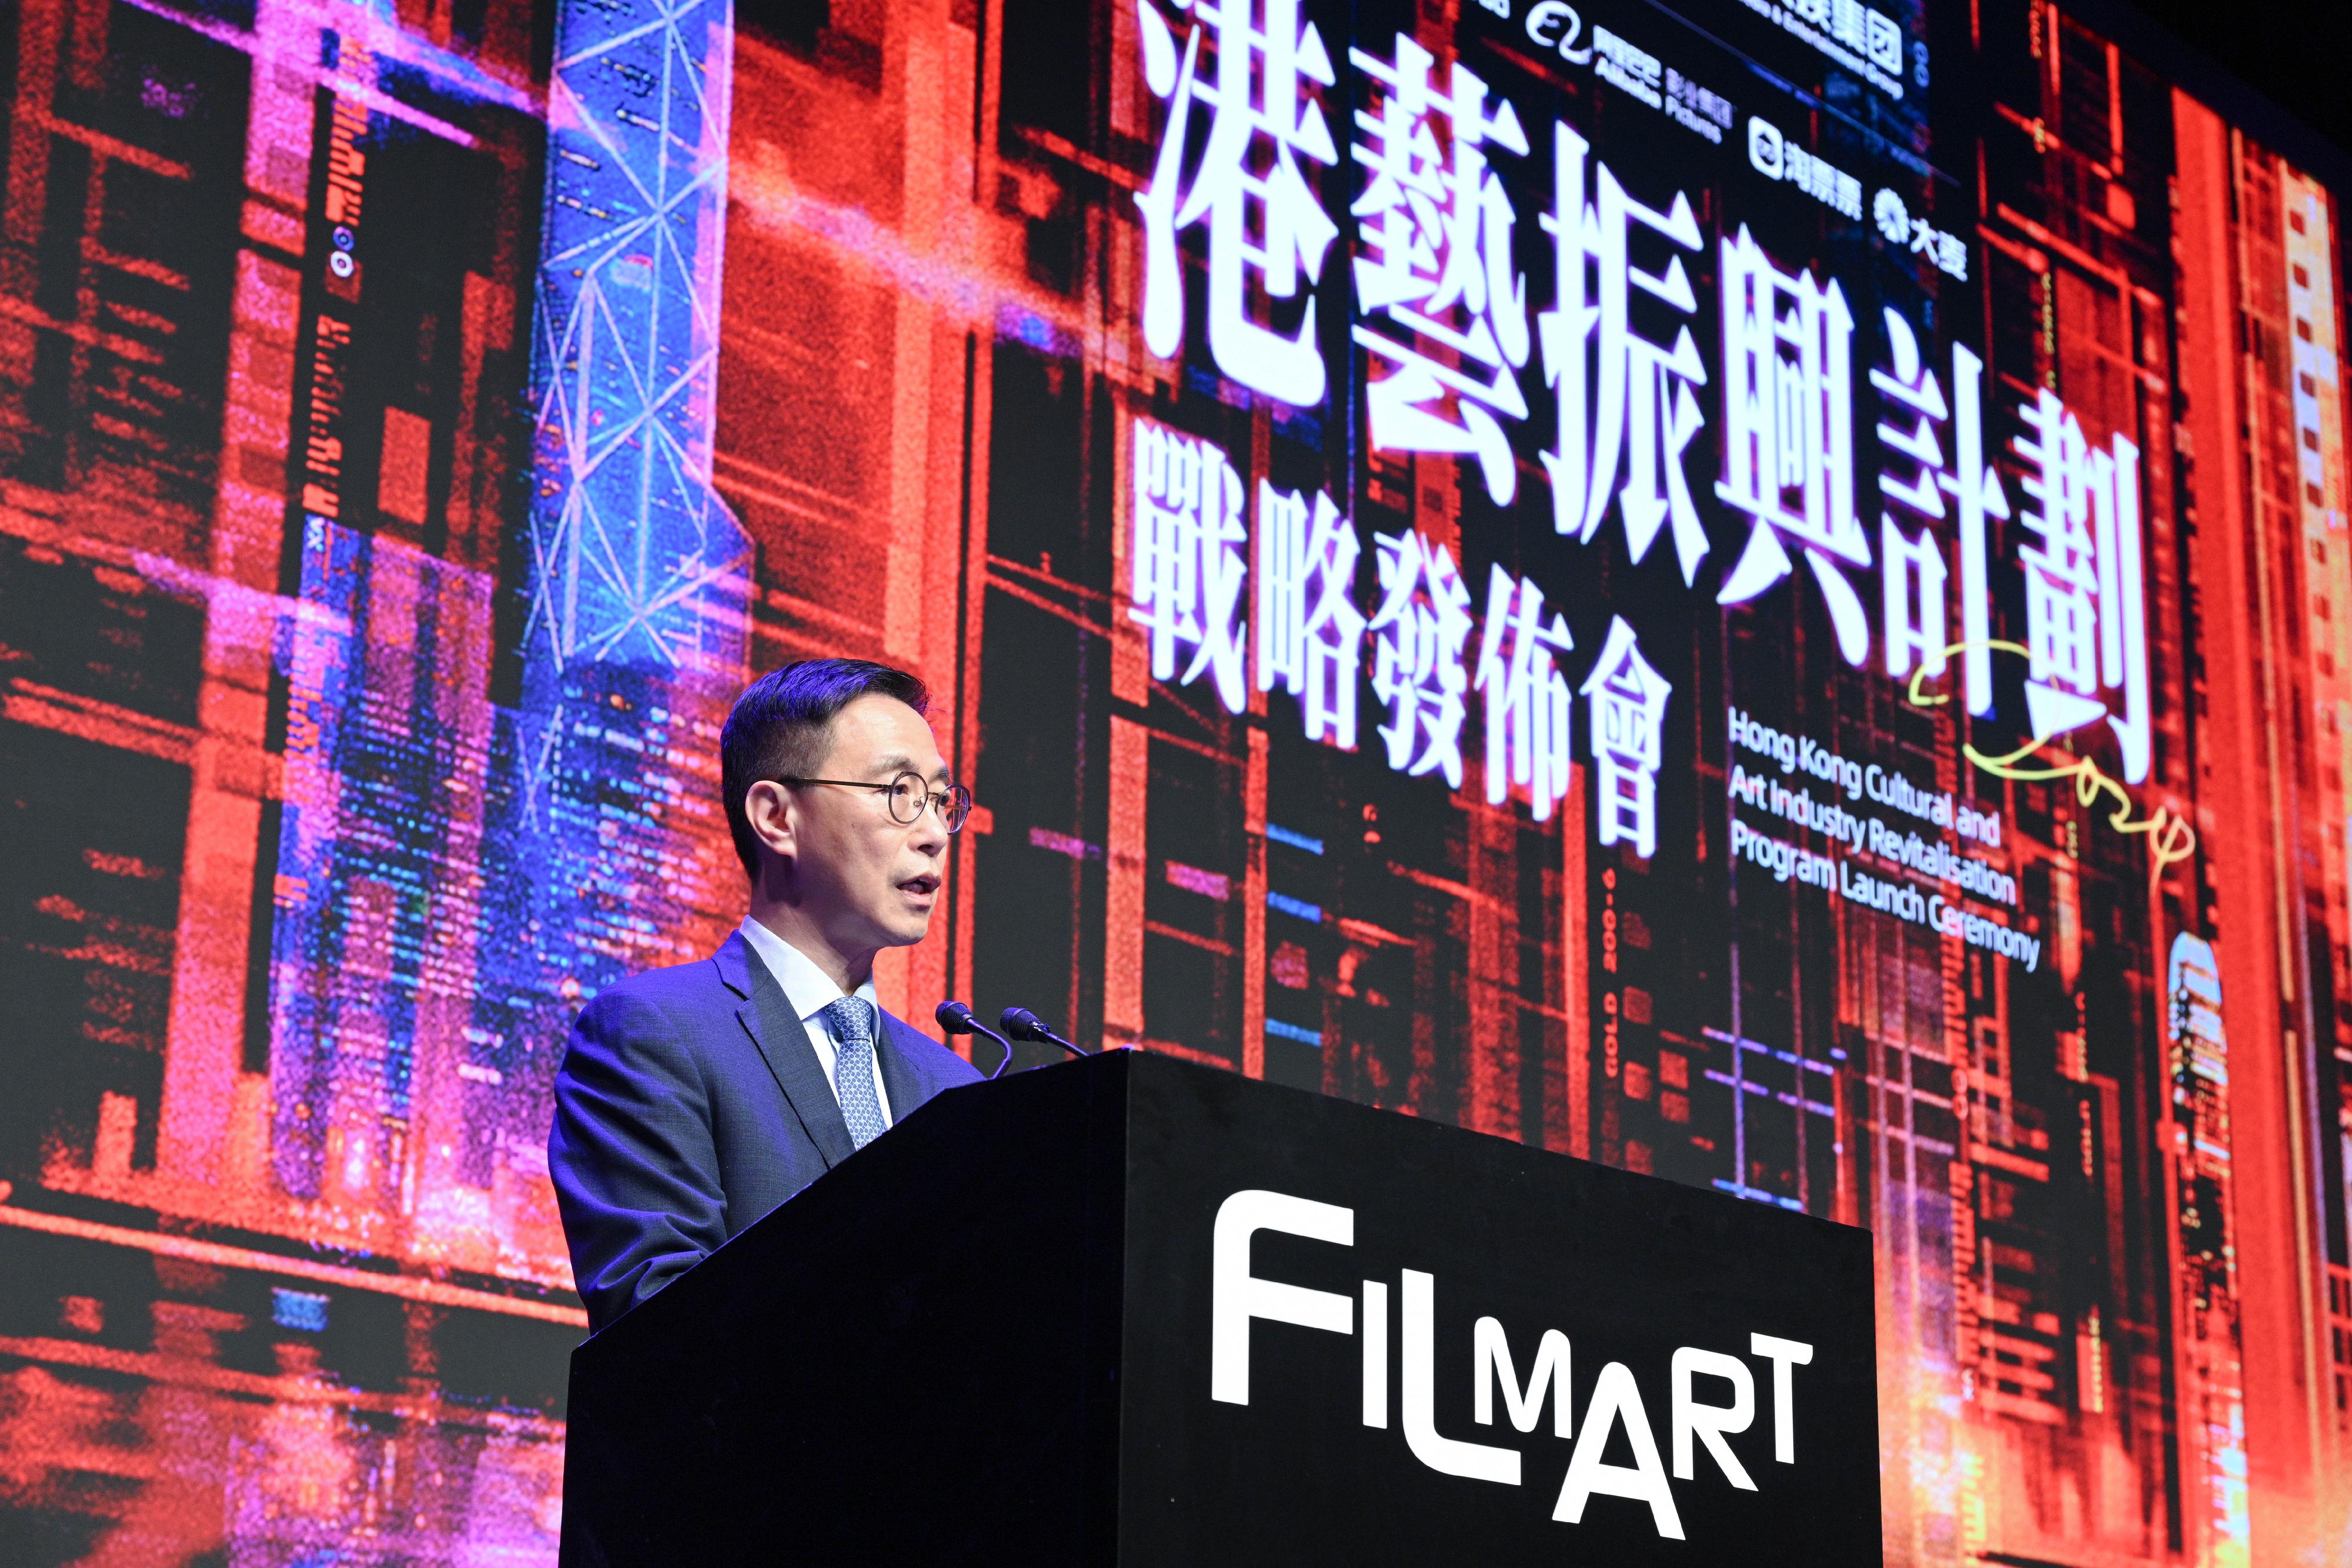 The Secretary for Culture, Sports and Tourism, Mr Kevin Yeung, speaks at the press conference for the Hong Kong Cultural and Art Industry Revitalisation Program by Alibaba Digital Media and Entertainment Group today (March 11).